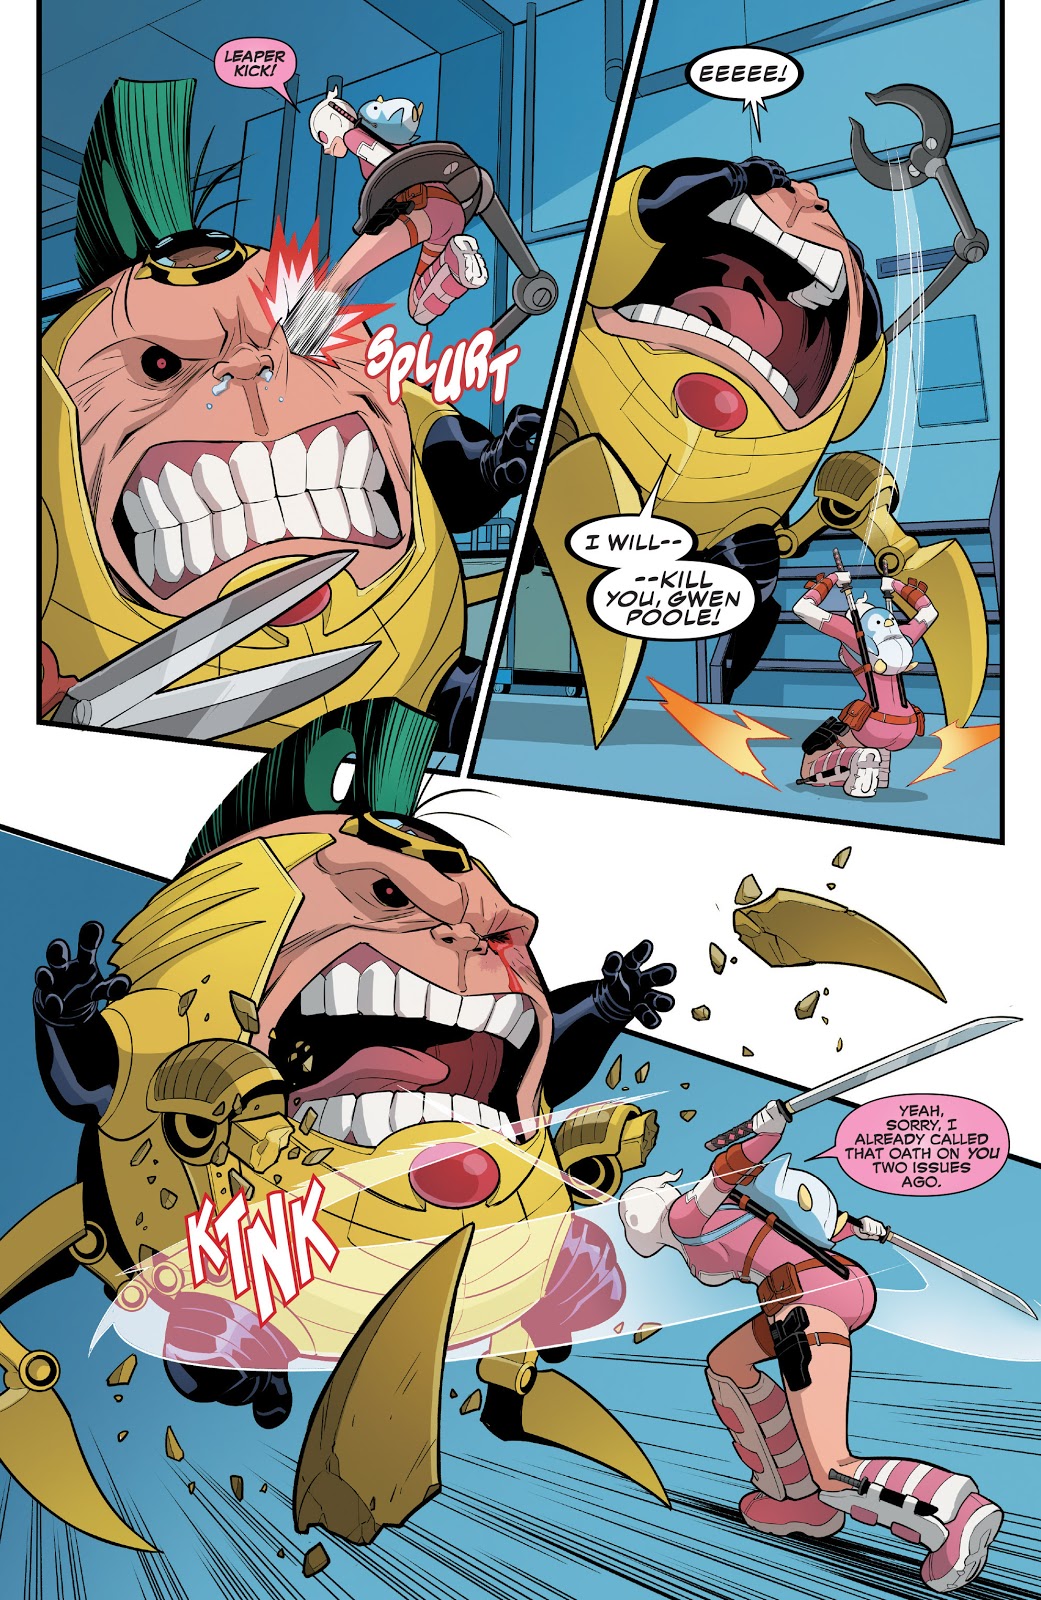 Gwenpool kicks M.O.D.O.K in the face during their battle. Hastings, Christopher. "Unbelievable Gwenpool Vol. 1." Marvel. 9 Nov. 2016.